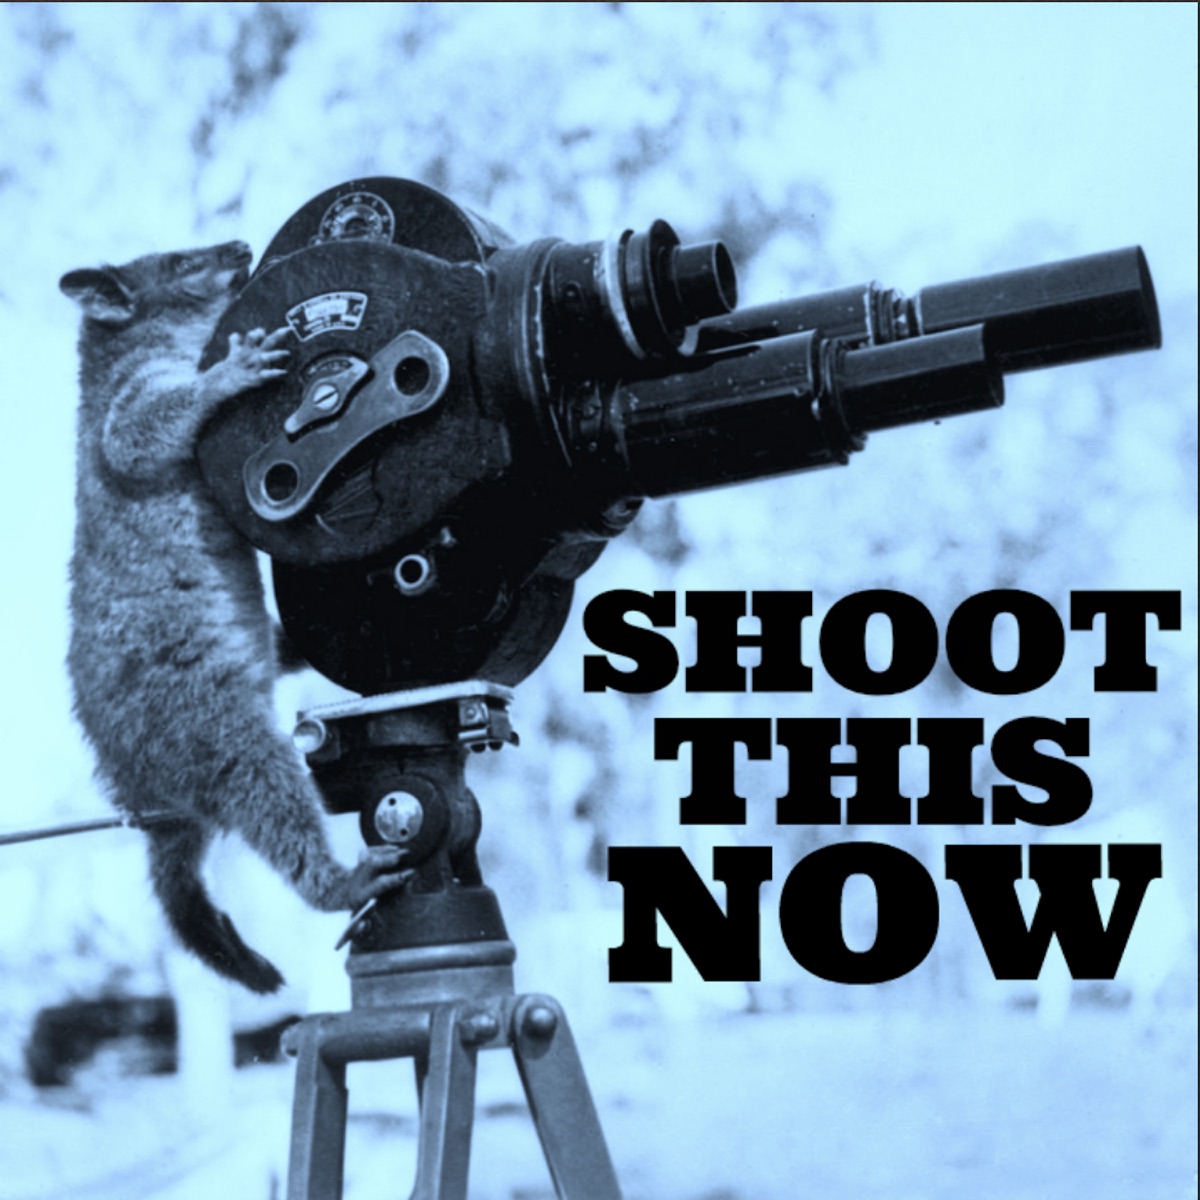 Nudist People Meet - The Barry Rothbart Nudist Videographer Story â€“ Shoot This Now â€“ Podcast â€“  Podtail